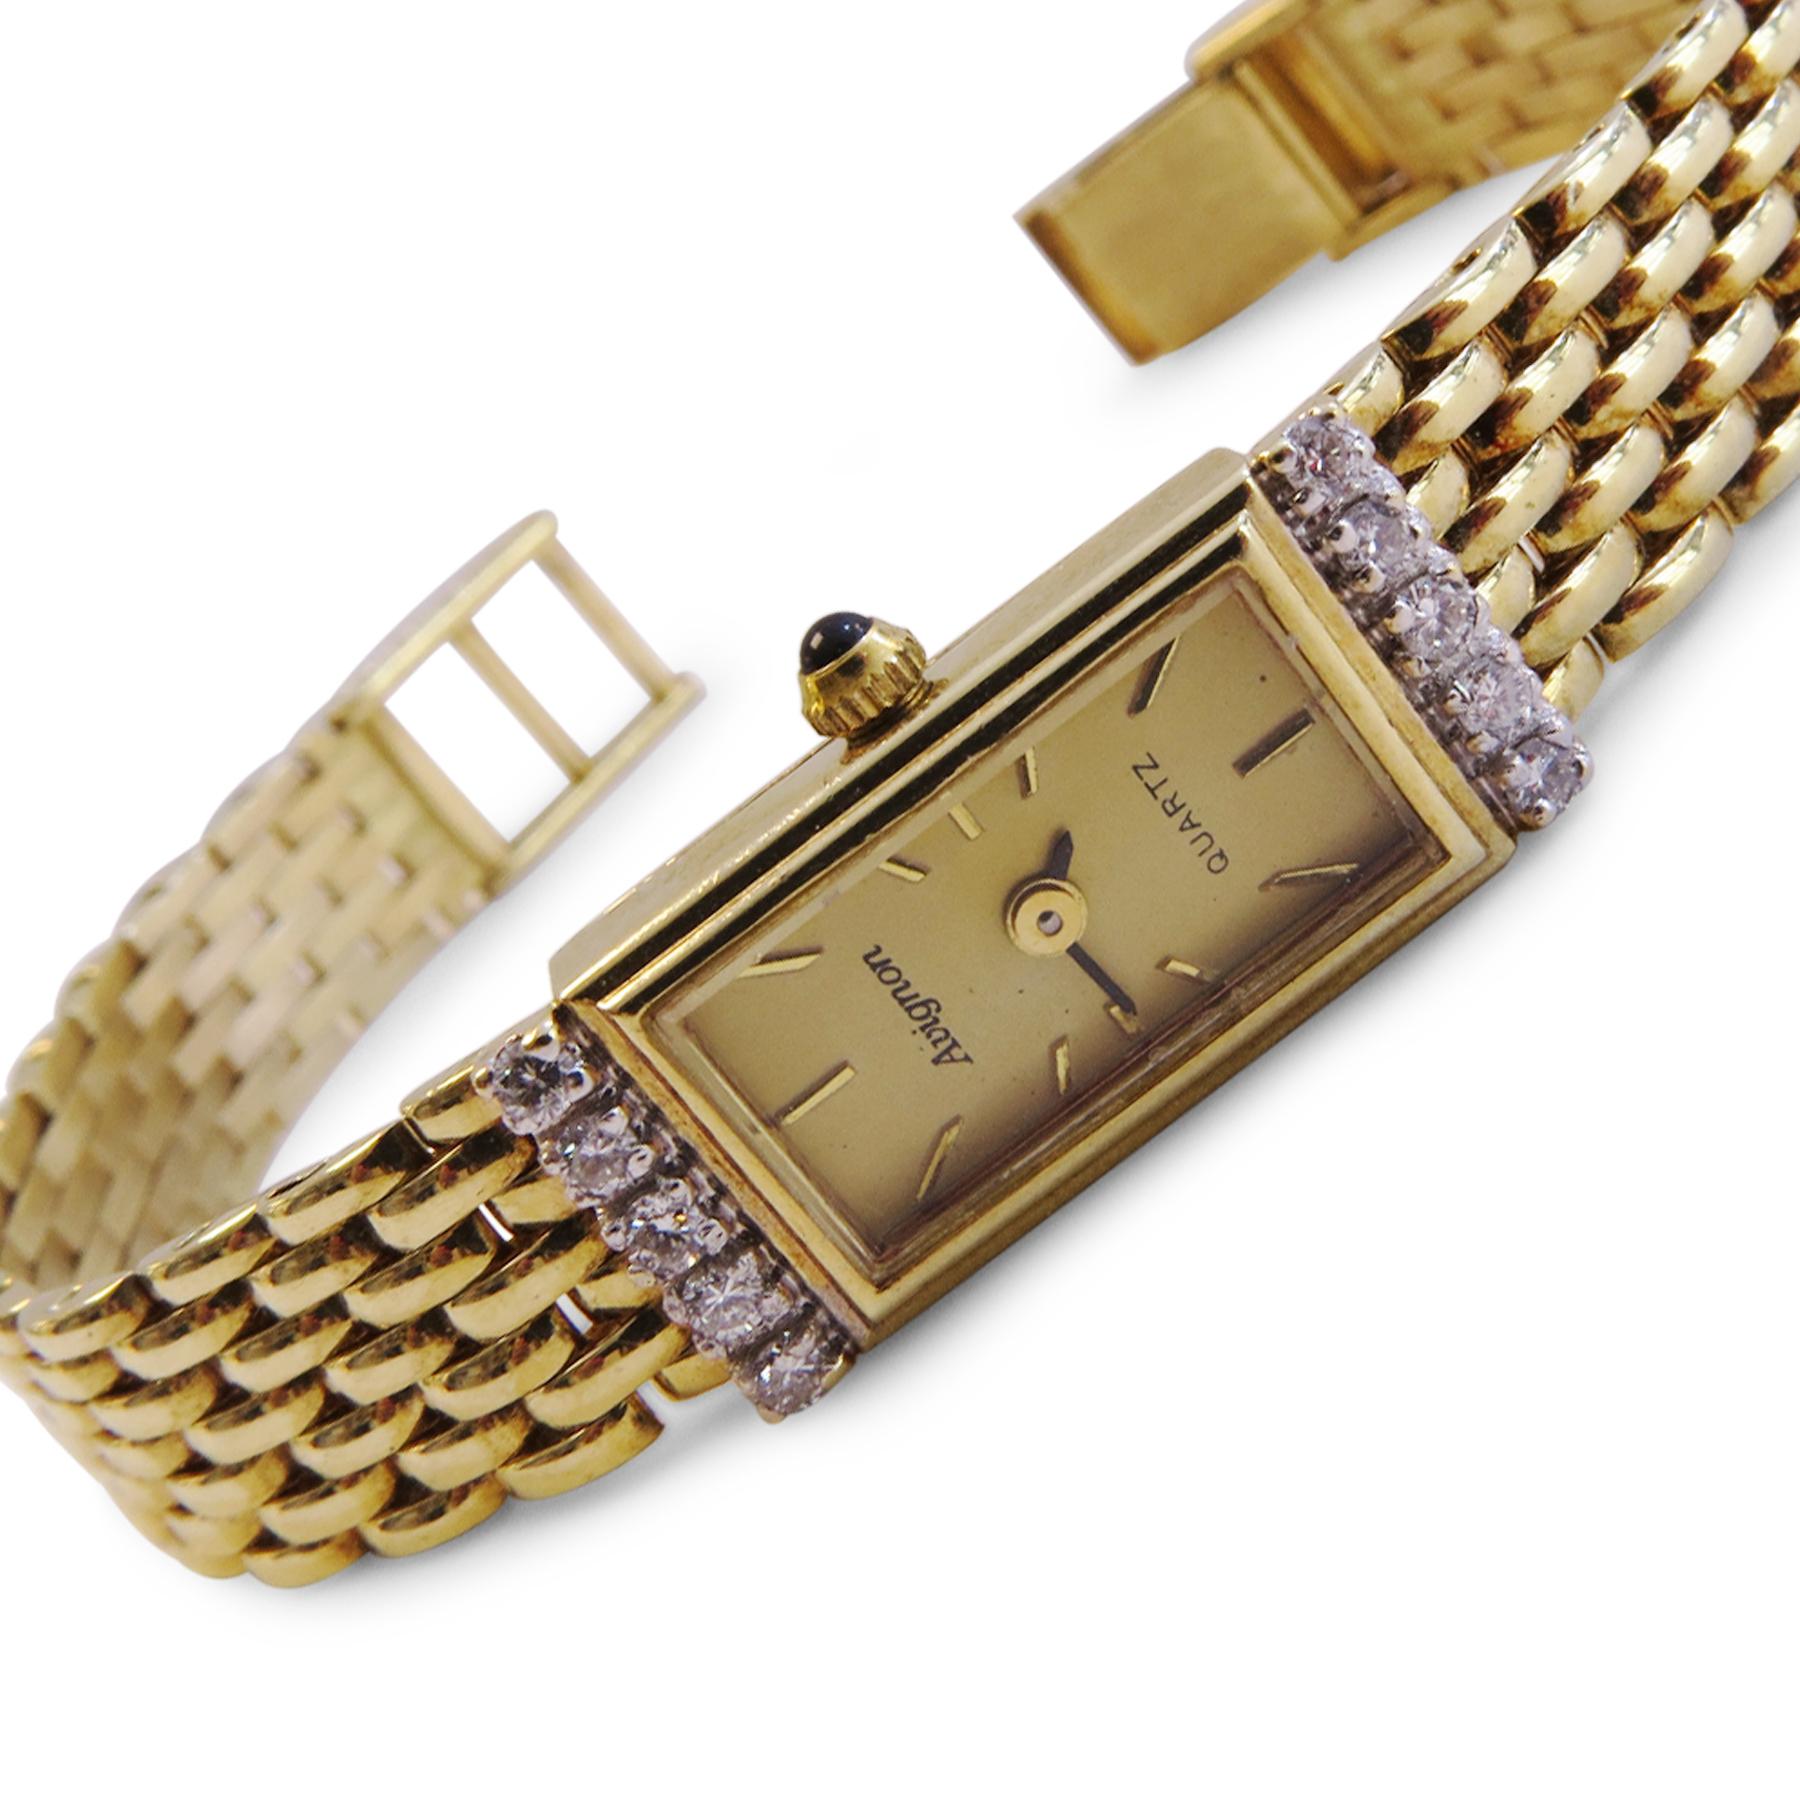 Avignon Brand 
14k Yellow Gold 
Size= 7 inches 
Weigh= 23gr 
Diamond= 0.30ct total 
Dial= 12mm x 23mm 
Bands= 10mm